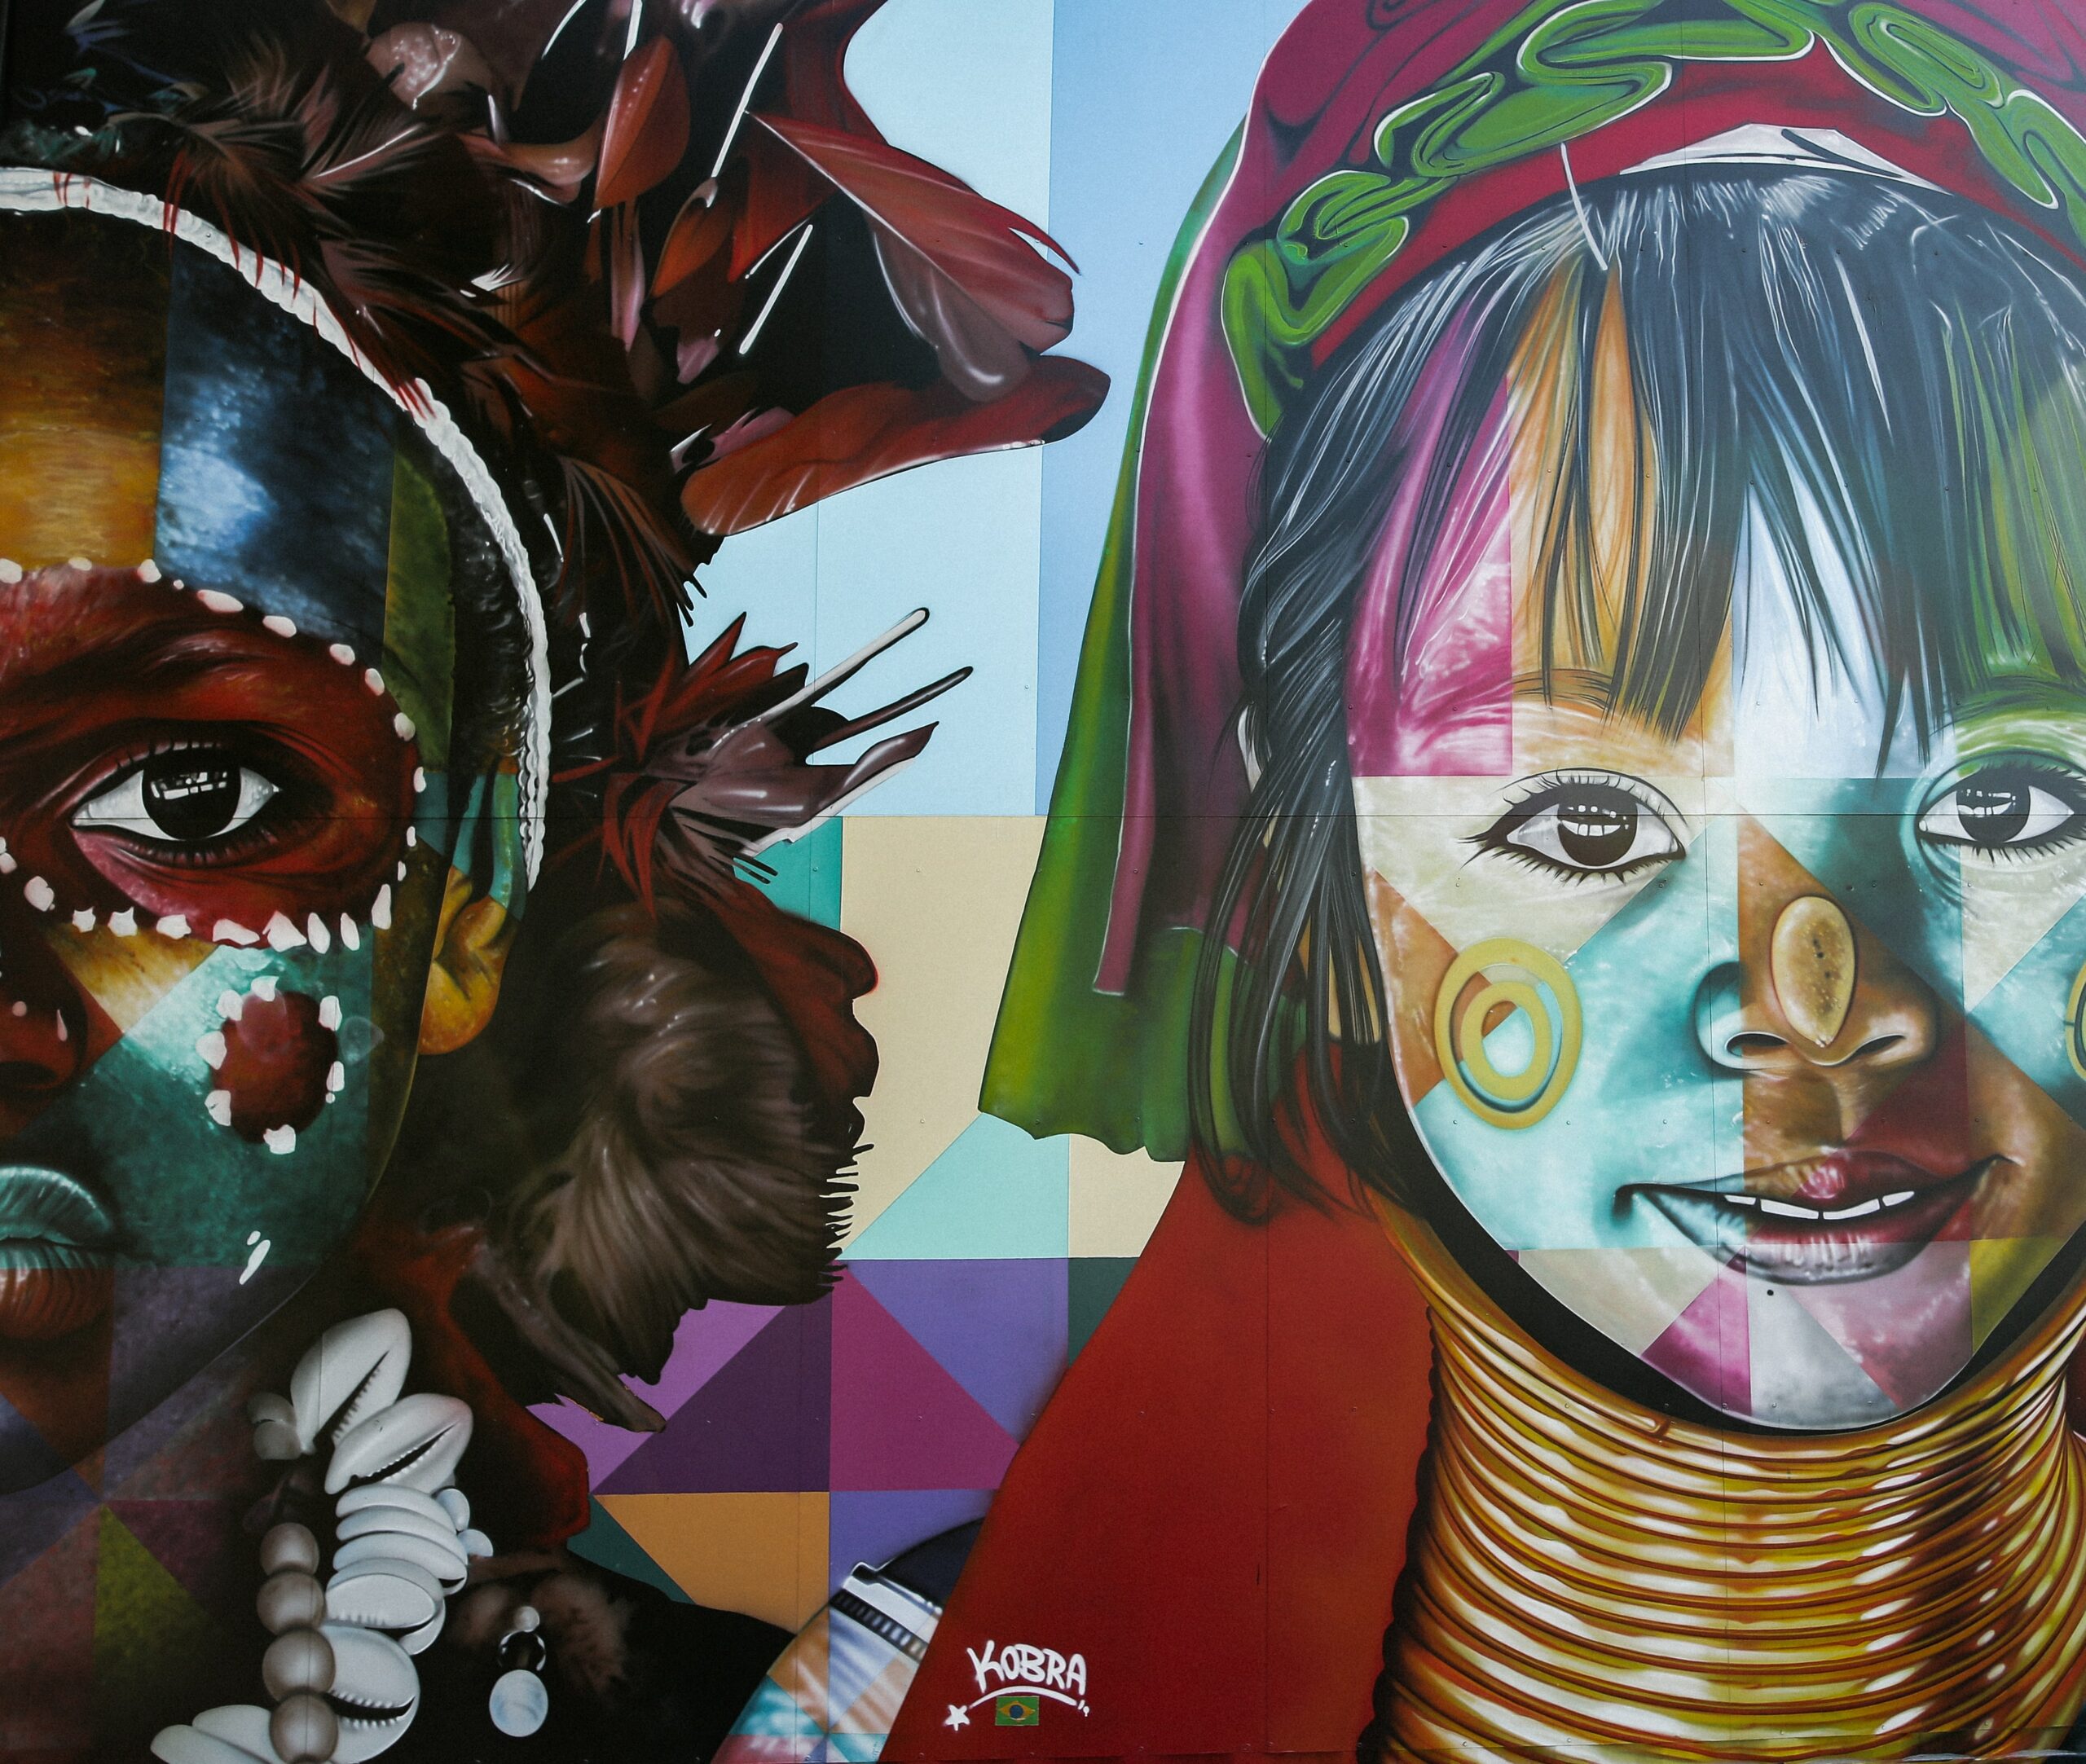 Colorful multicultural wall mural by artist Kobra